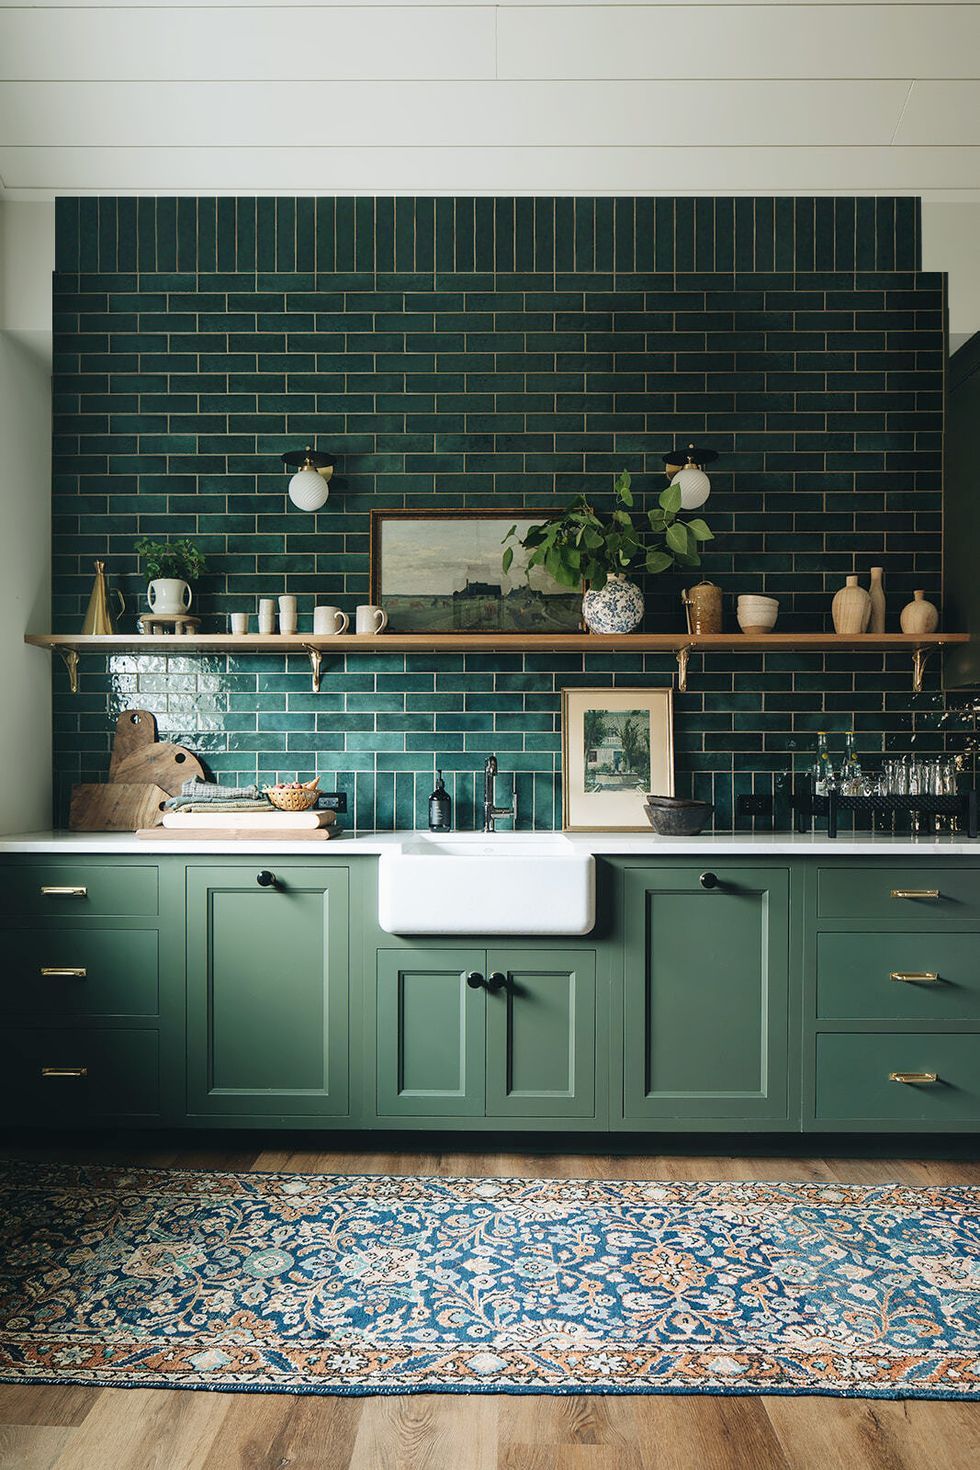 Green Kitchens - Paint Colors, Decor & Cabinets, Topics